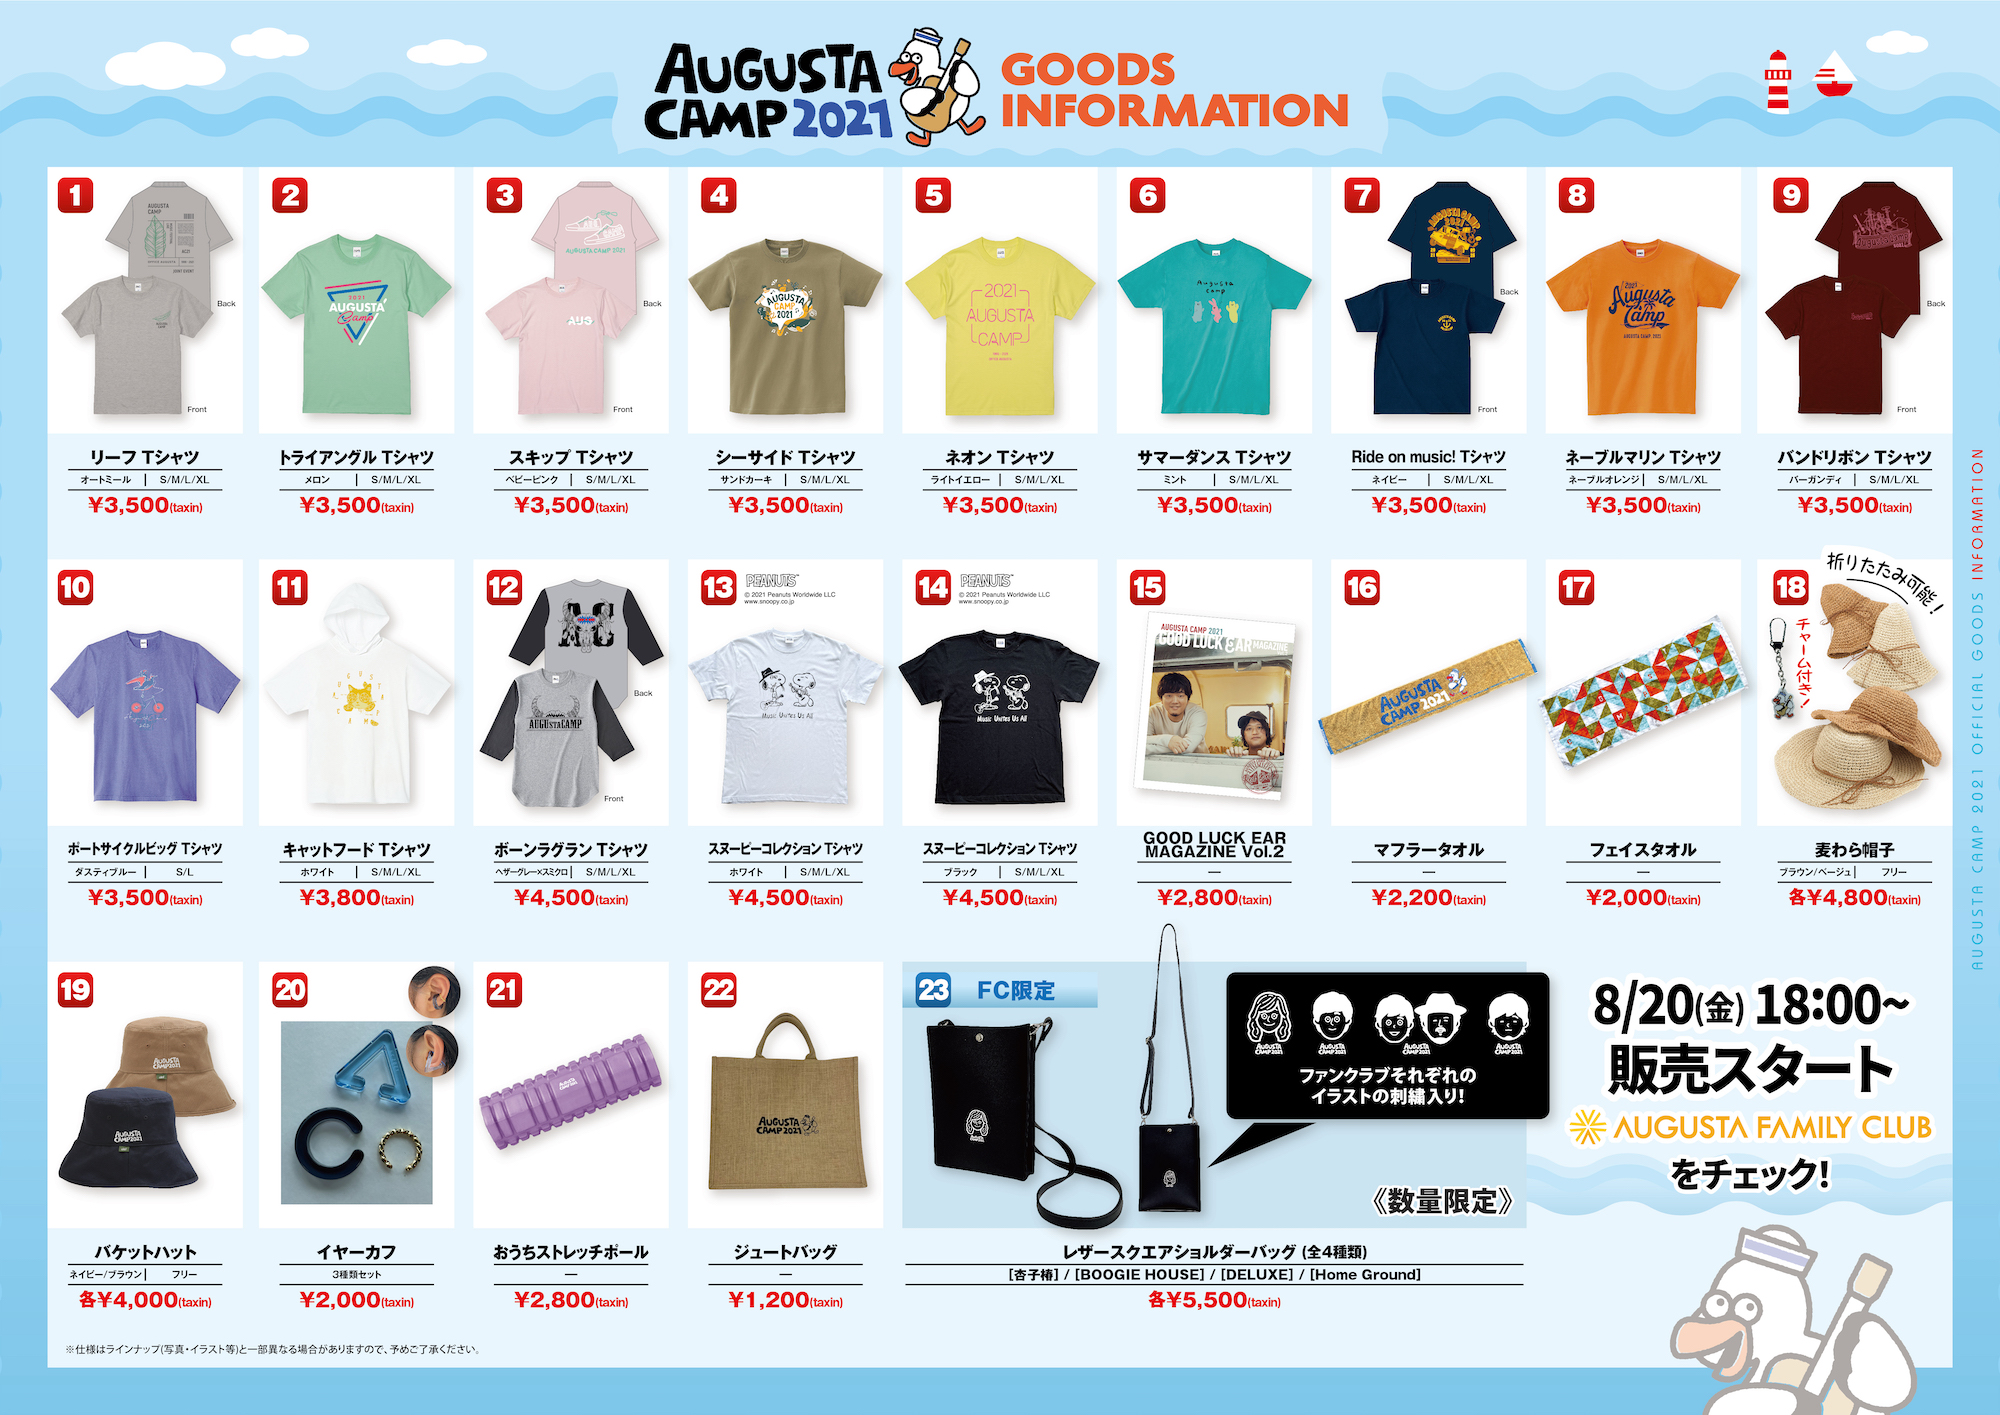 Augusta Camp 2021 Official Goods Lineup Announced!